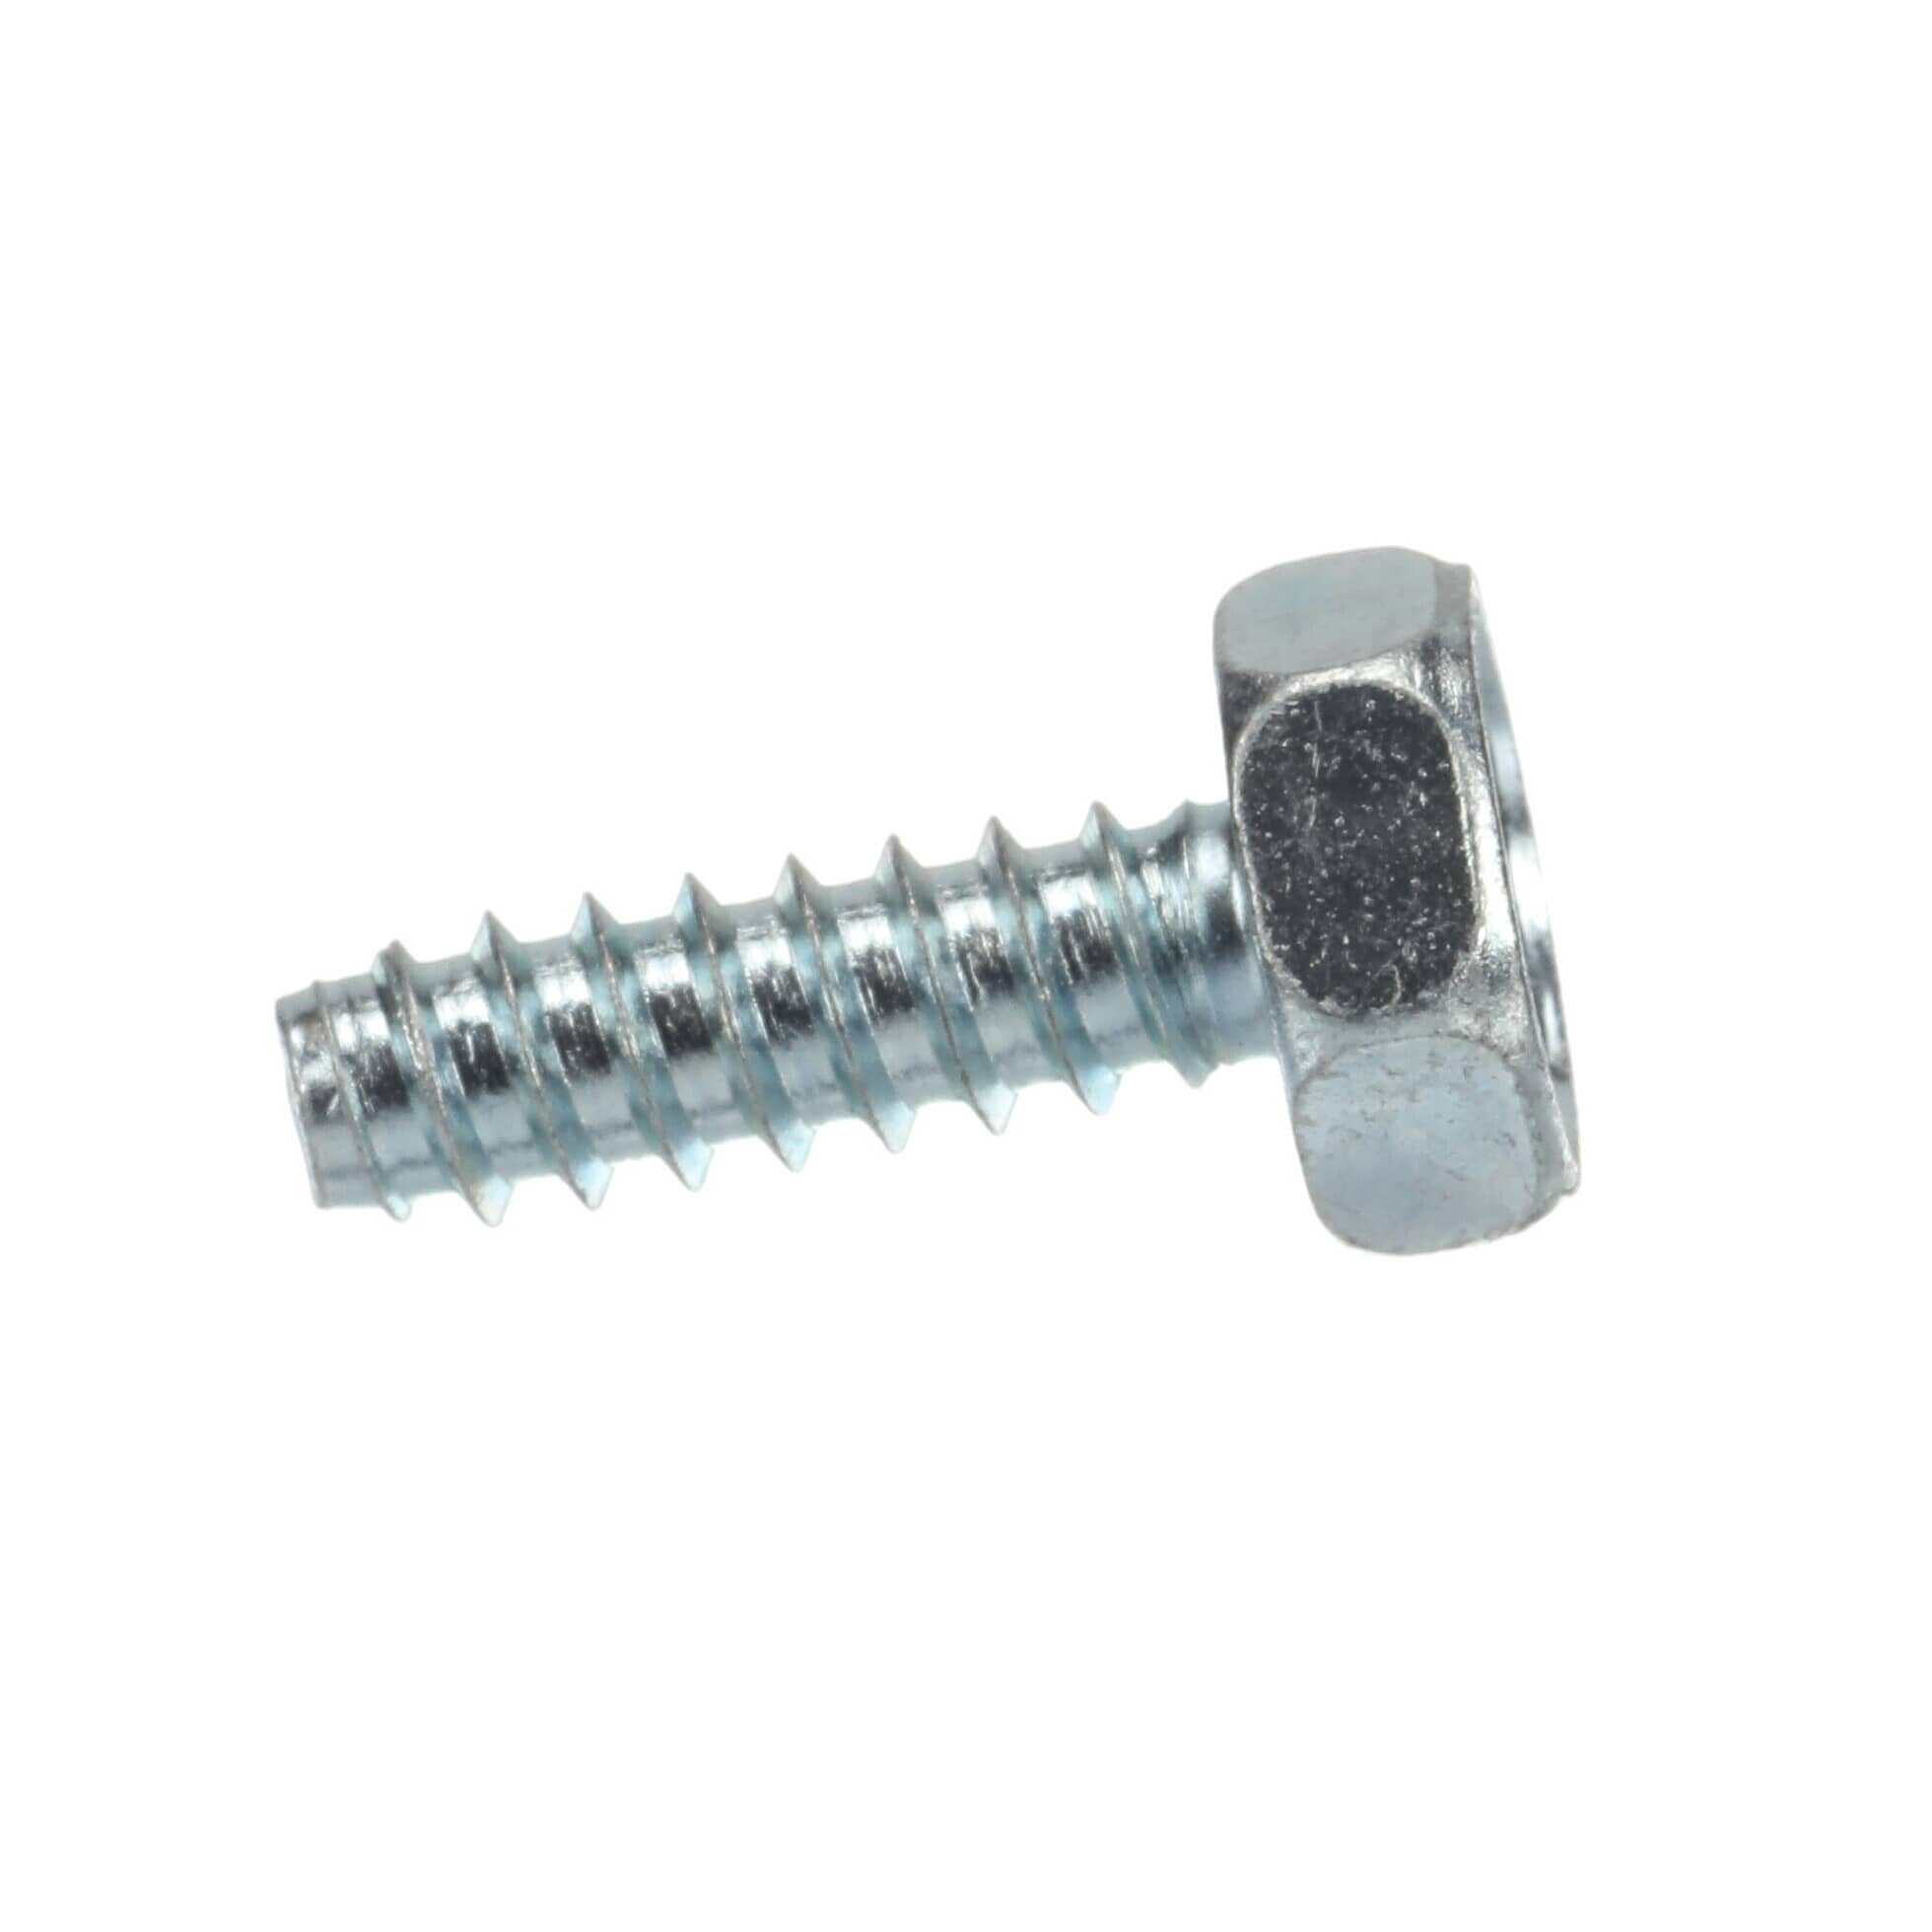 Samsung 6002-001431 Screw-Tapping